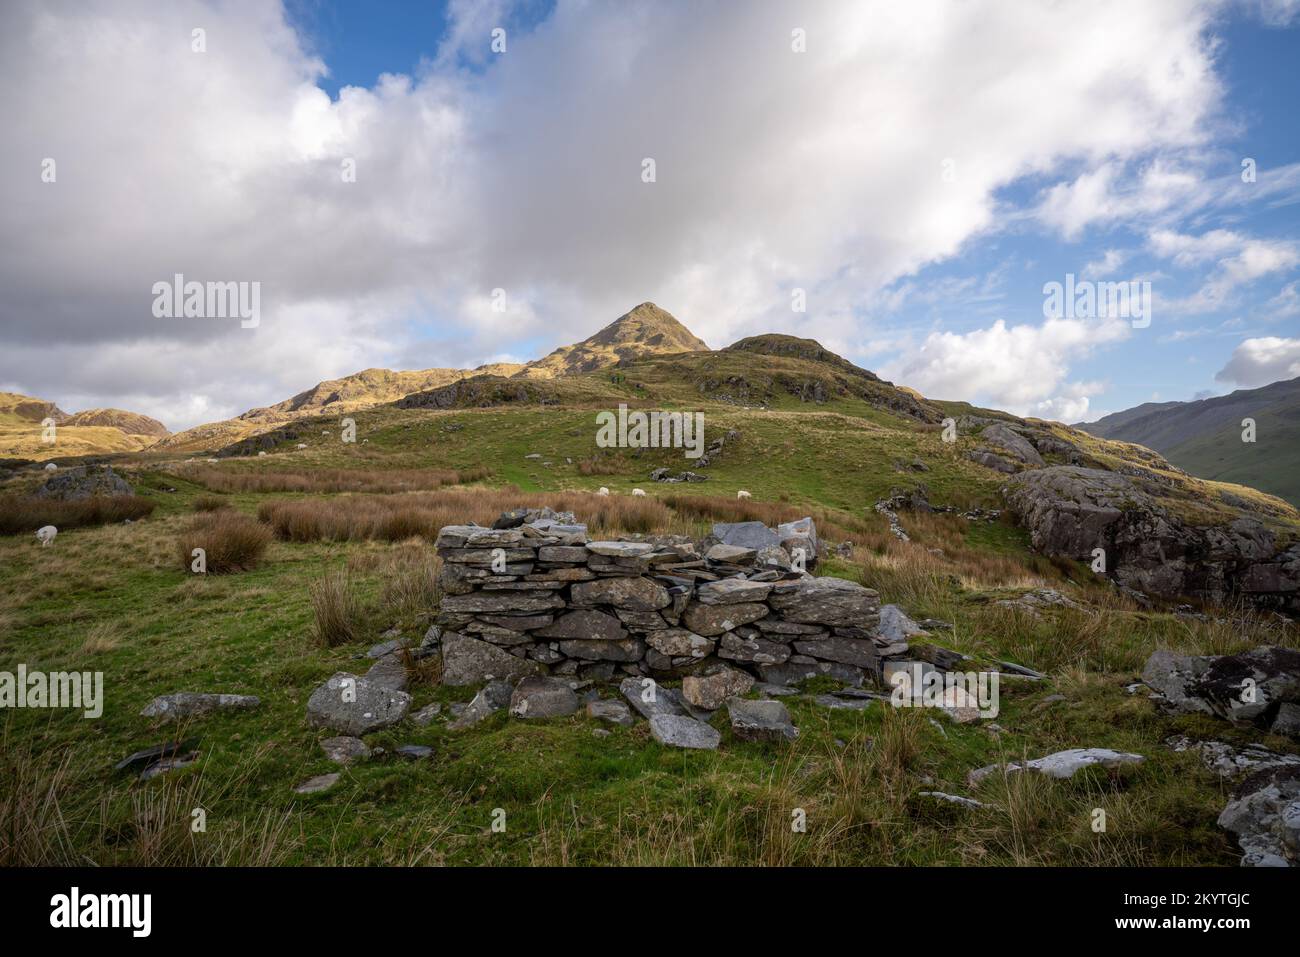 On route climbing Cnicht Mountain in the Snowdonia national park in North Wales, UK, Stock Photo